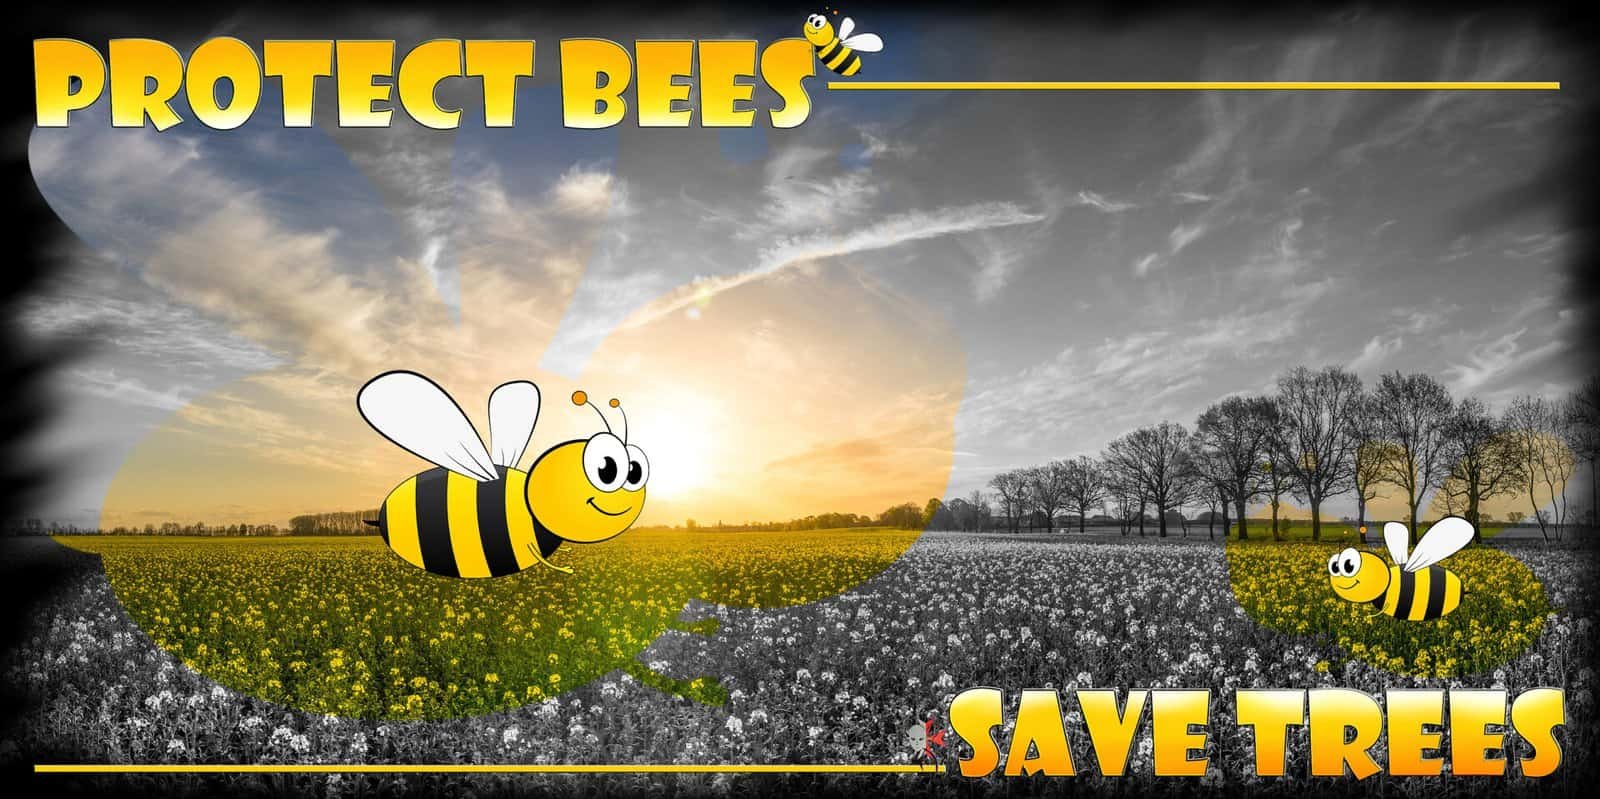 Design - Save the bees - print-on demand products